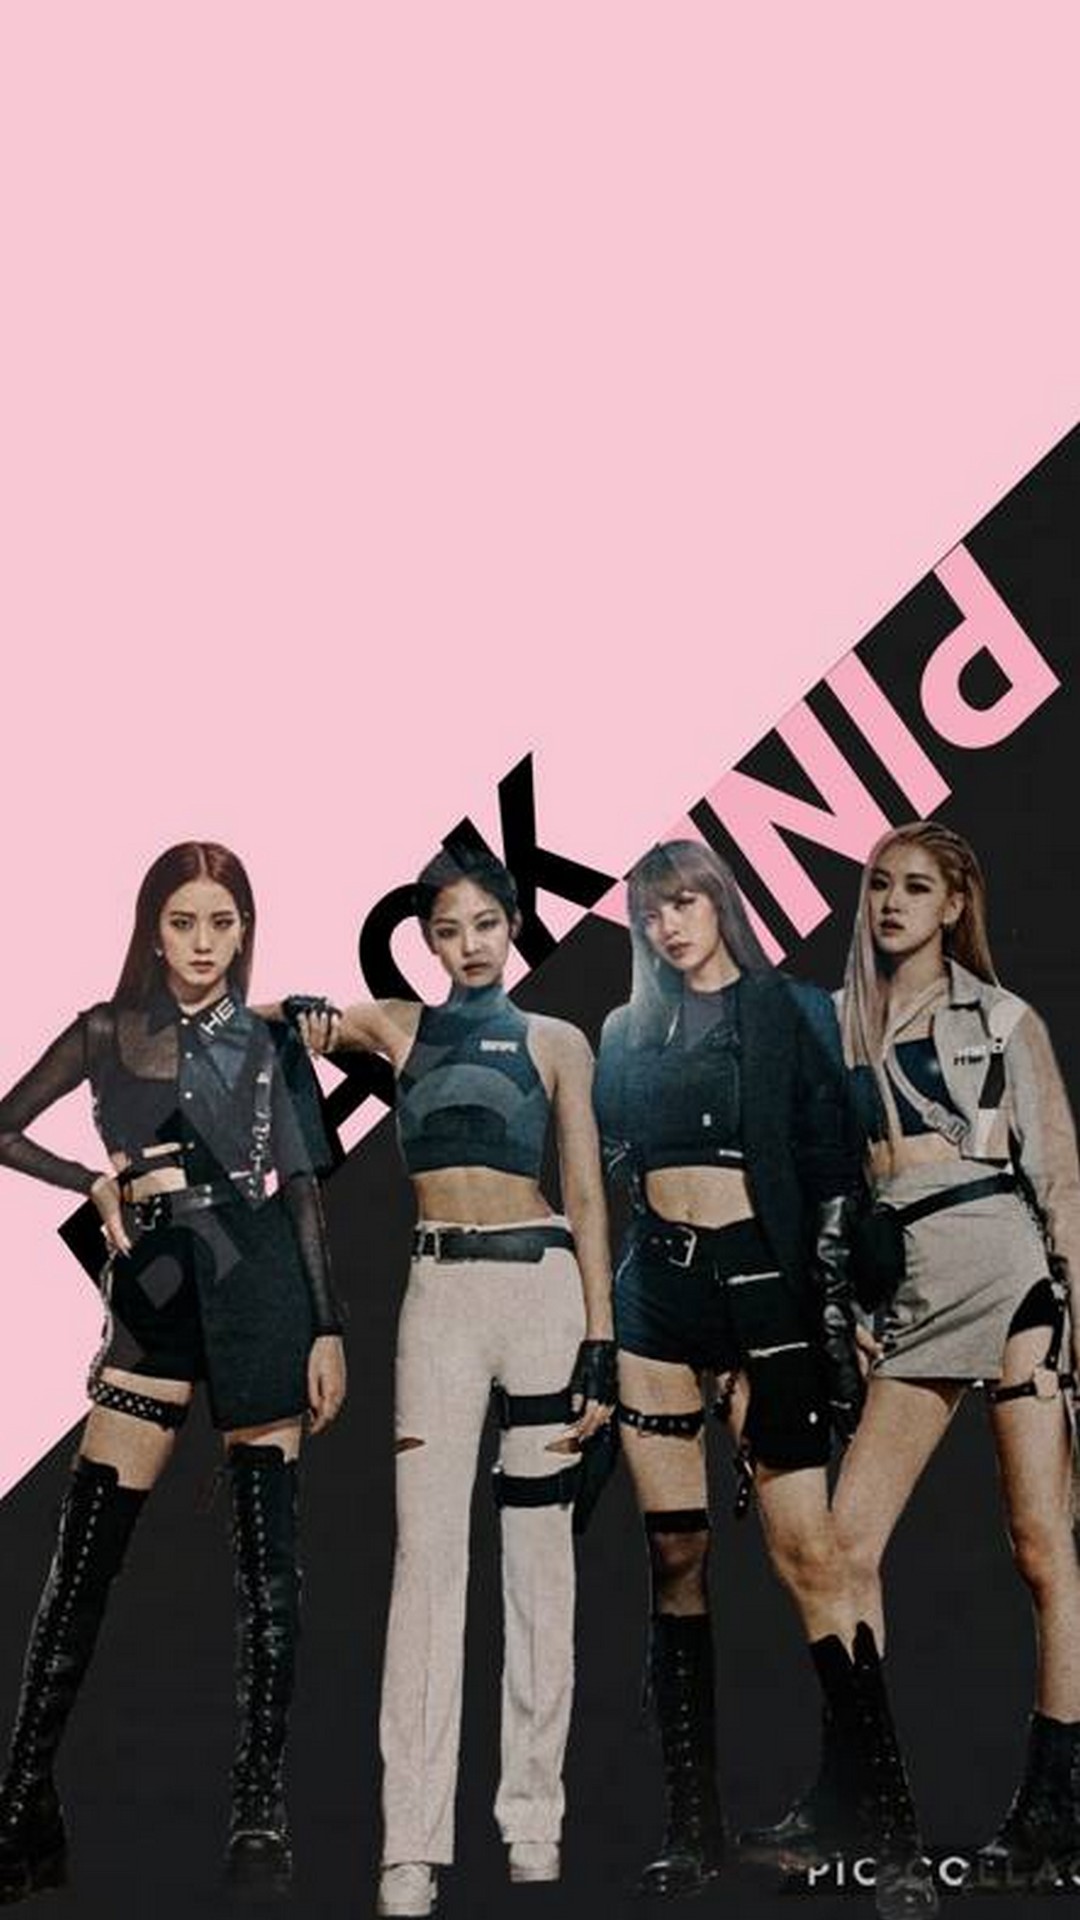 Blackpink Wallpaper For Android With High-resolution - HD Wallpaper 